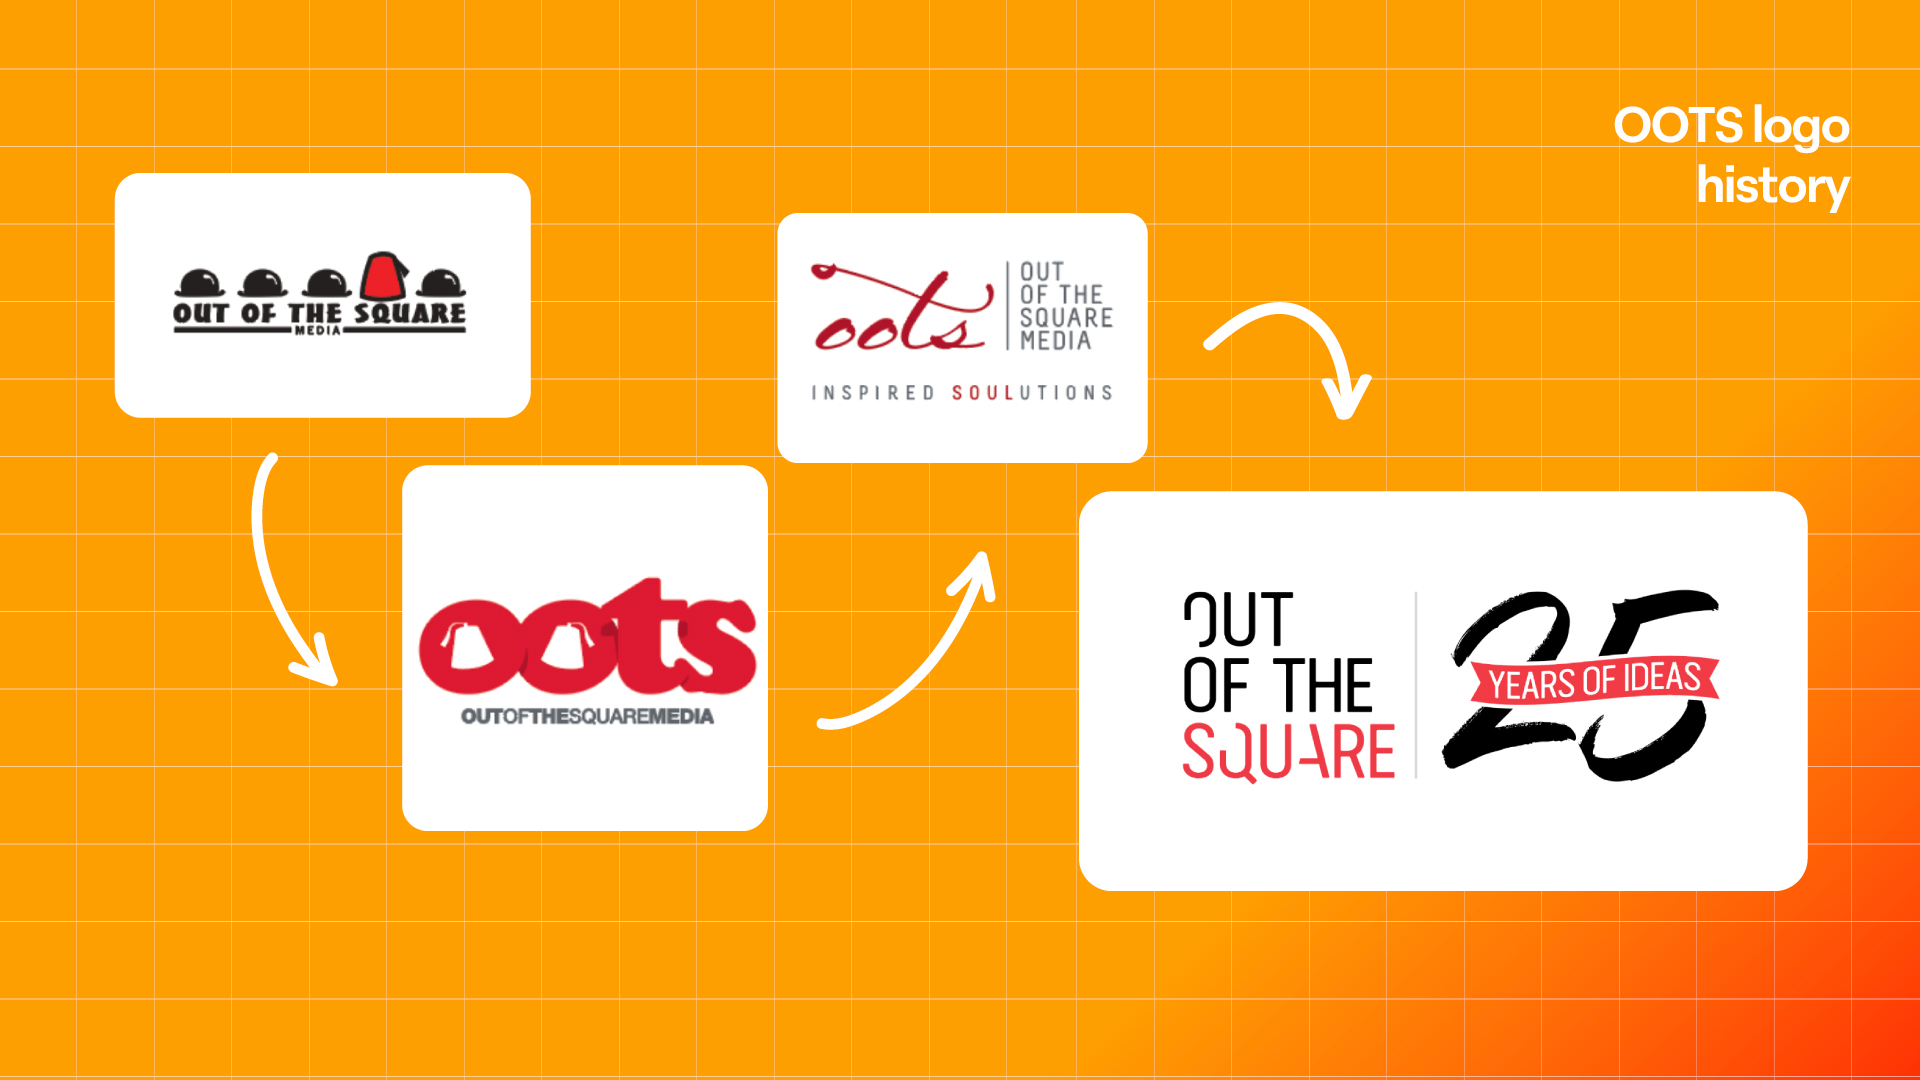 Out of the square logo history